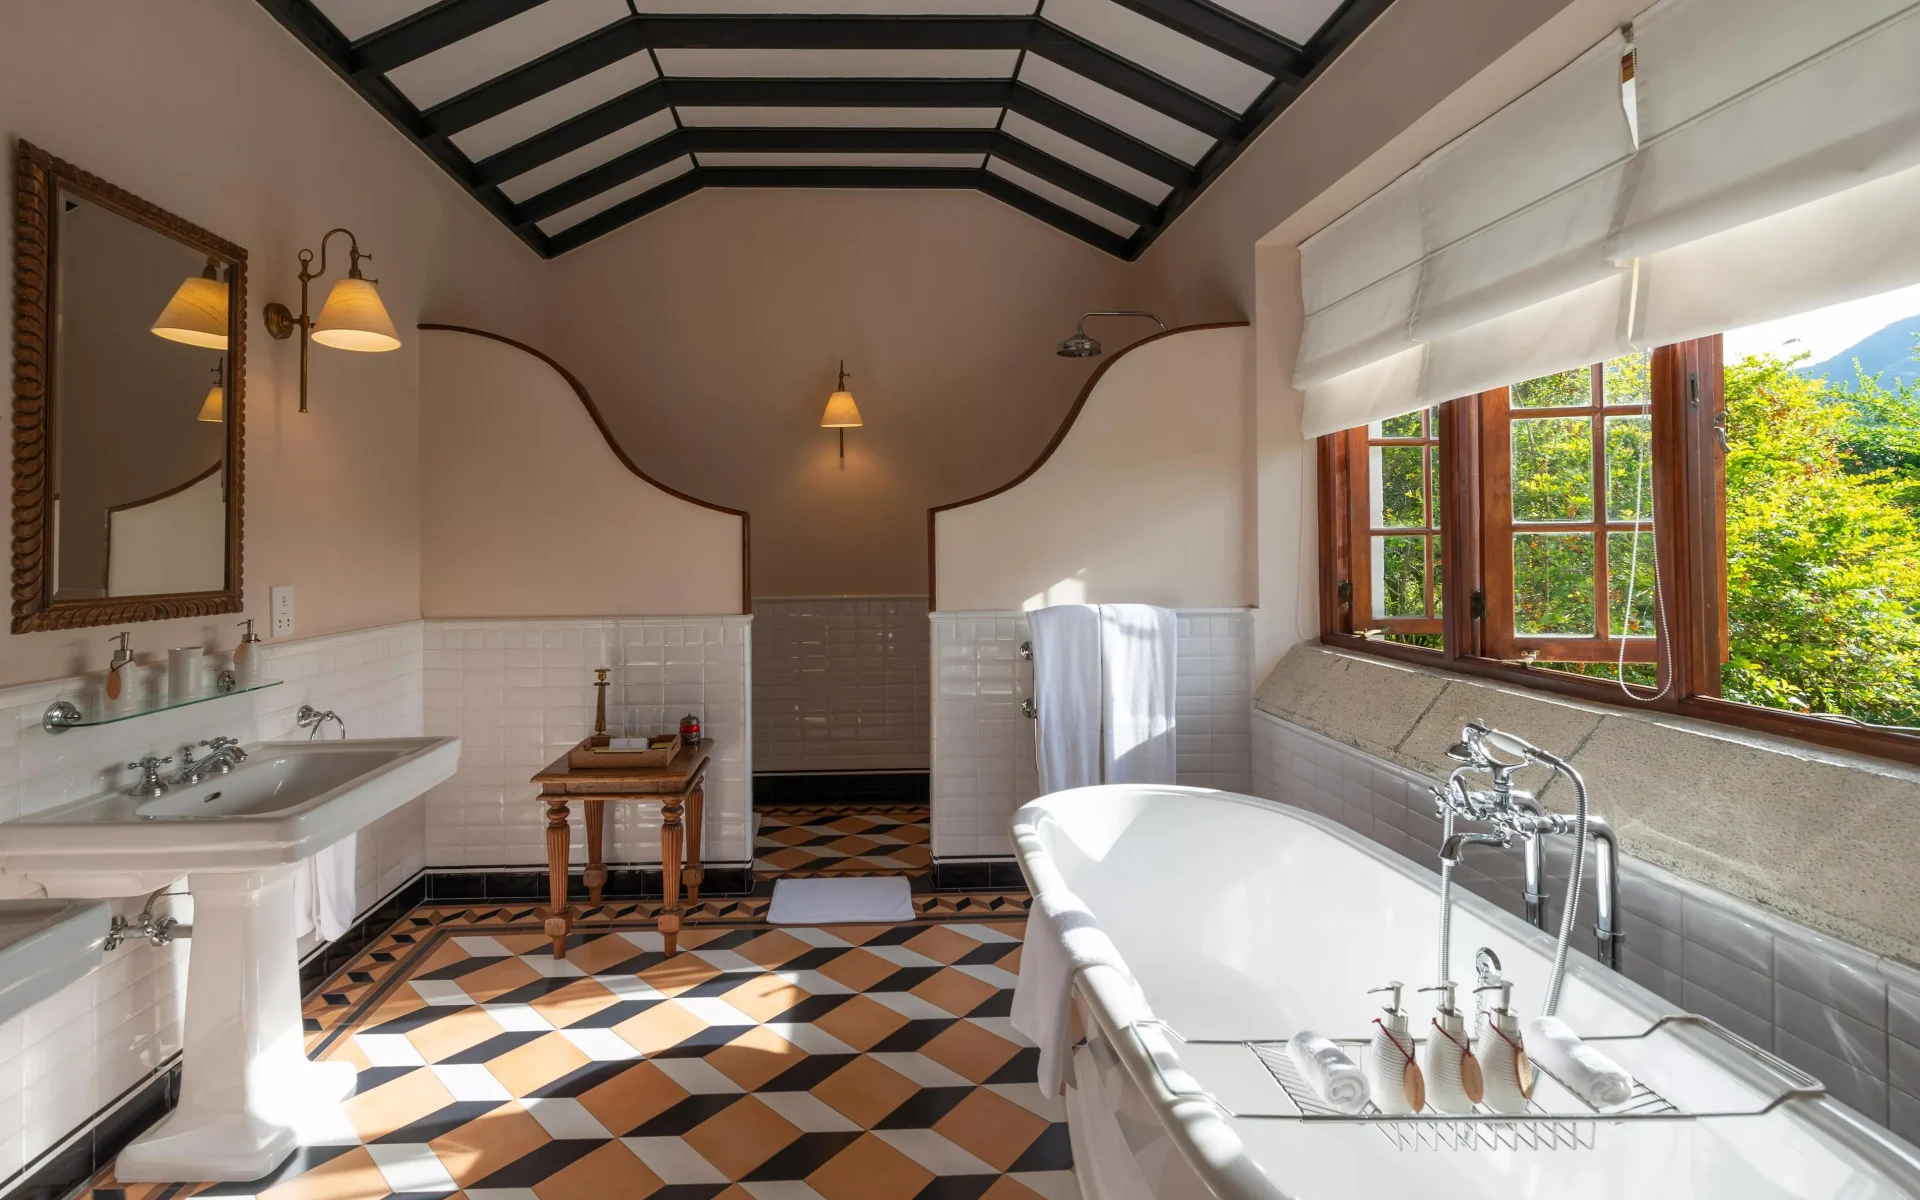 A bathroom at the Ceylon Tea Trails, dressed in colourful tiles and equipped with a free-standing bathtub.